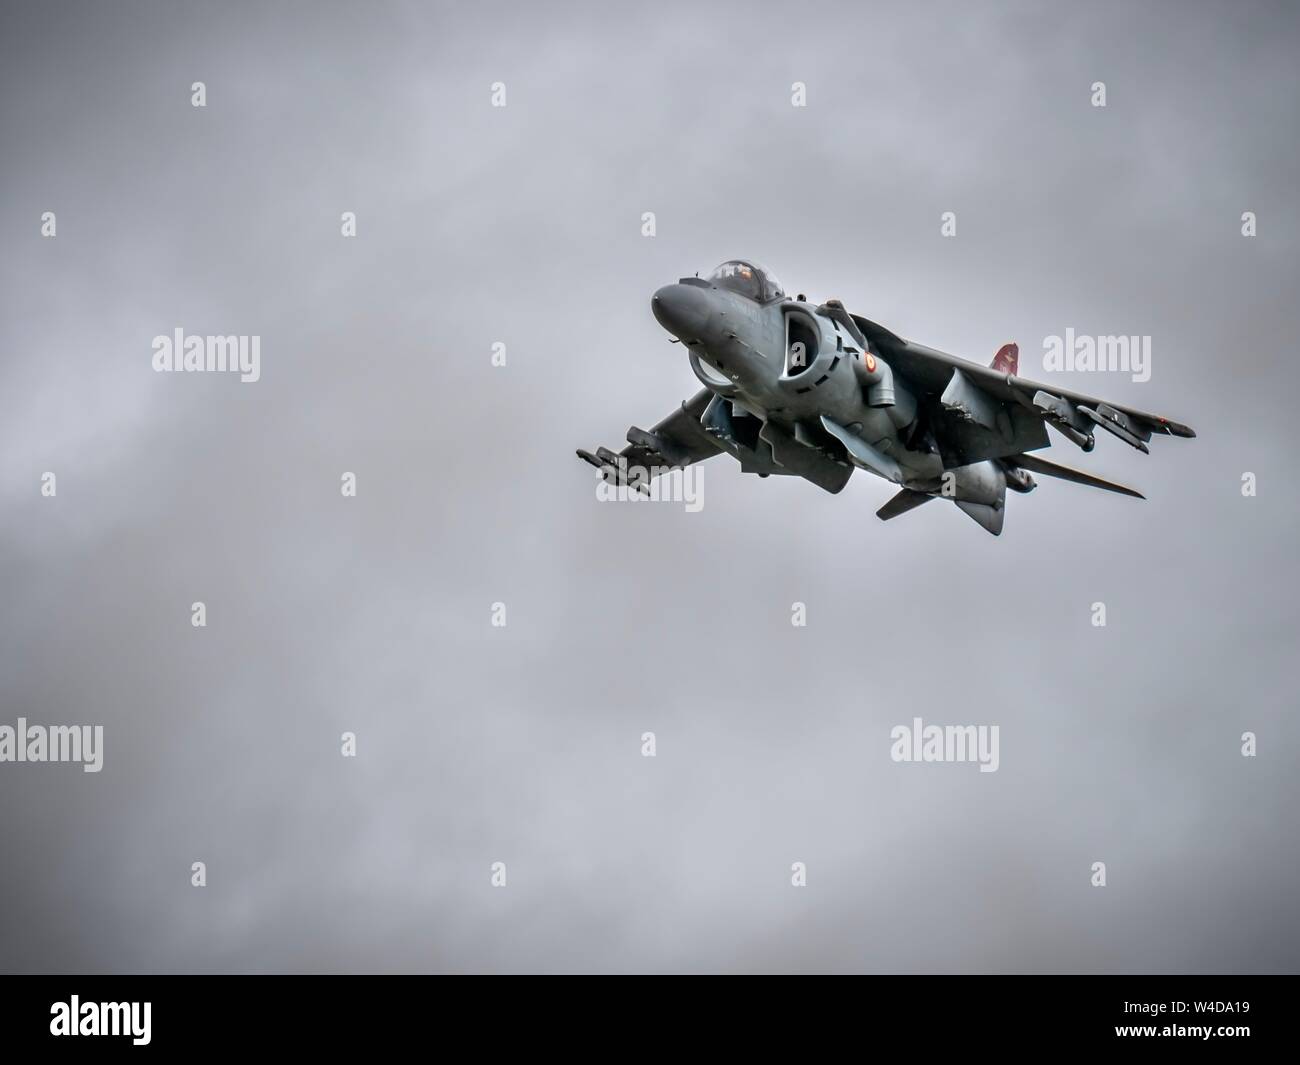 A Spanish Harrier jump jet performing a fly past at the Royal International Air Tattoo at Fairford in the UK on a cloudy day Stock Photo